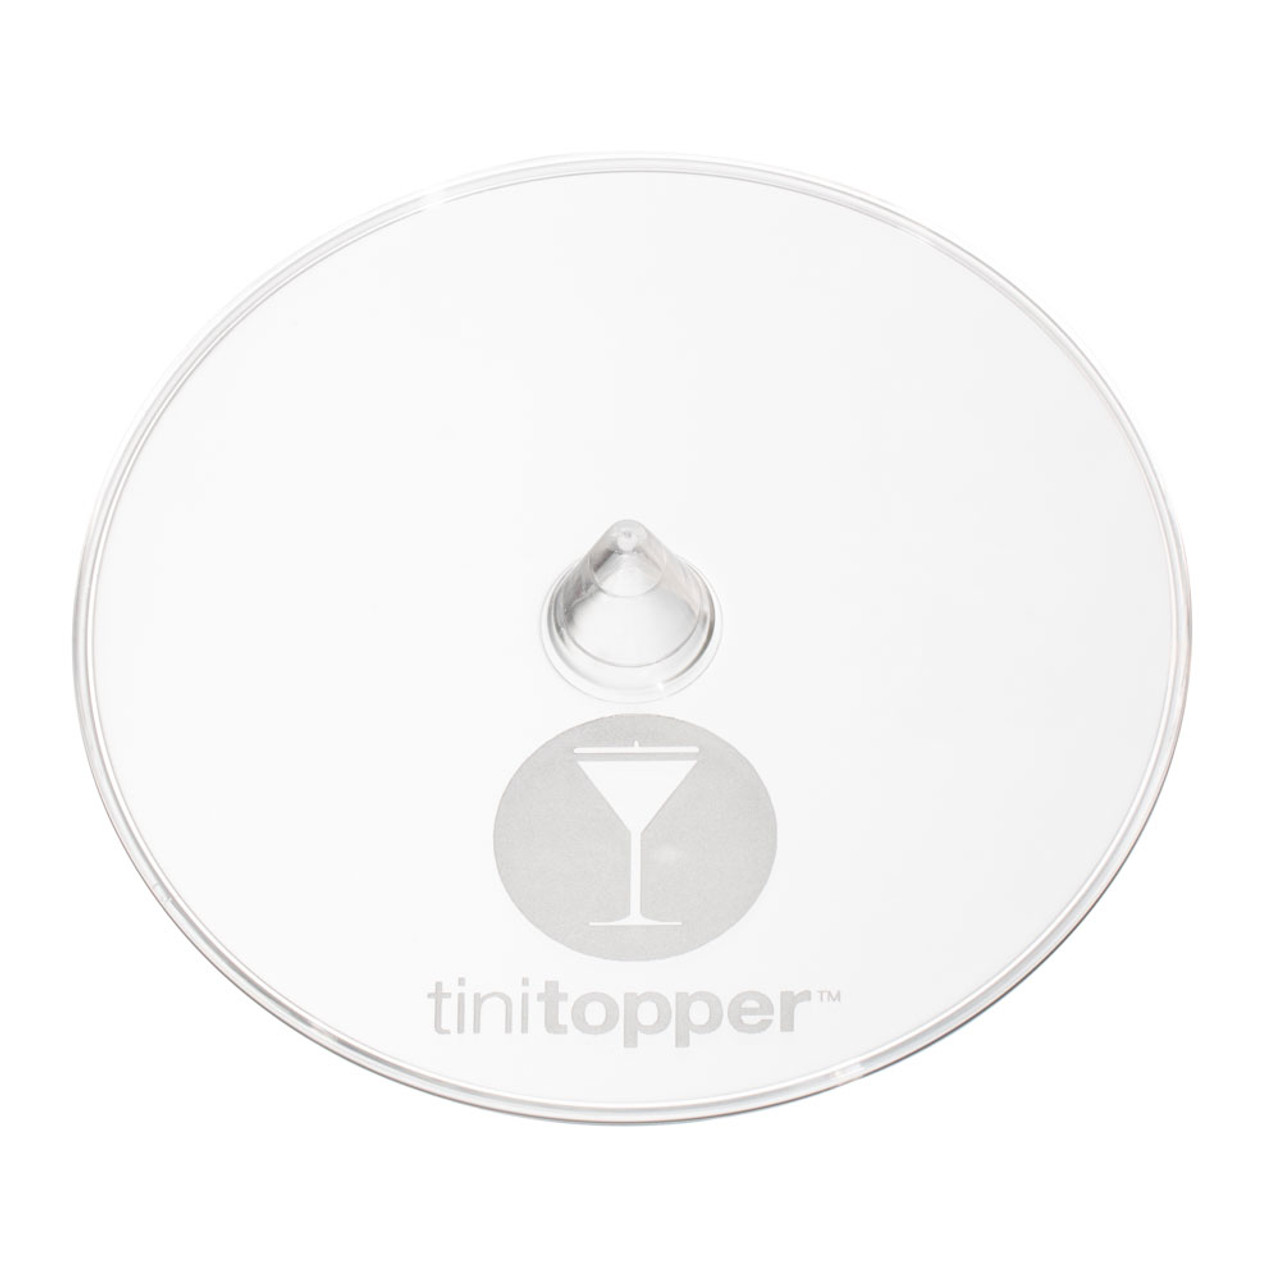 https://cdn11.bigcommerce.com/s-cznxq08r7/images/stencil/1280x1280/products/5049/13987/TINI-TOP-8PK-TiniTopper-Drinkware-Covers-Prevents-Spills-and-Protect-Your-Drink-Includes-8-Covers-with-Holder-001__90684.1631533193.jpg?c=1